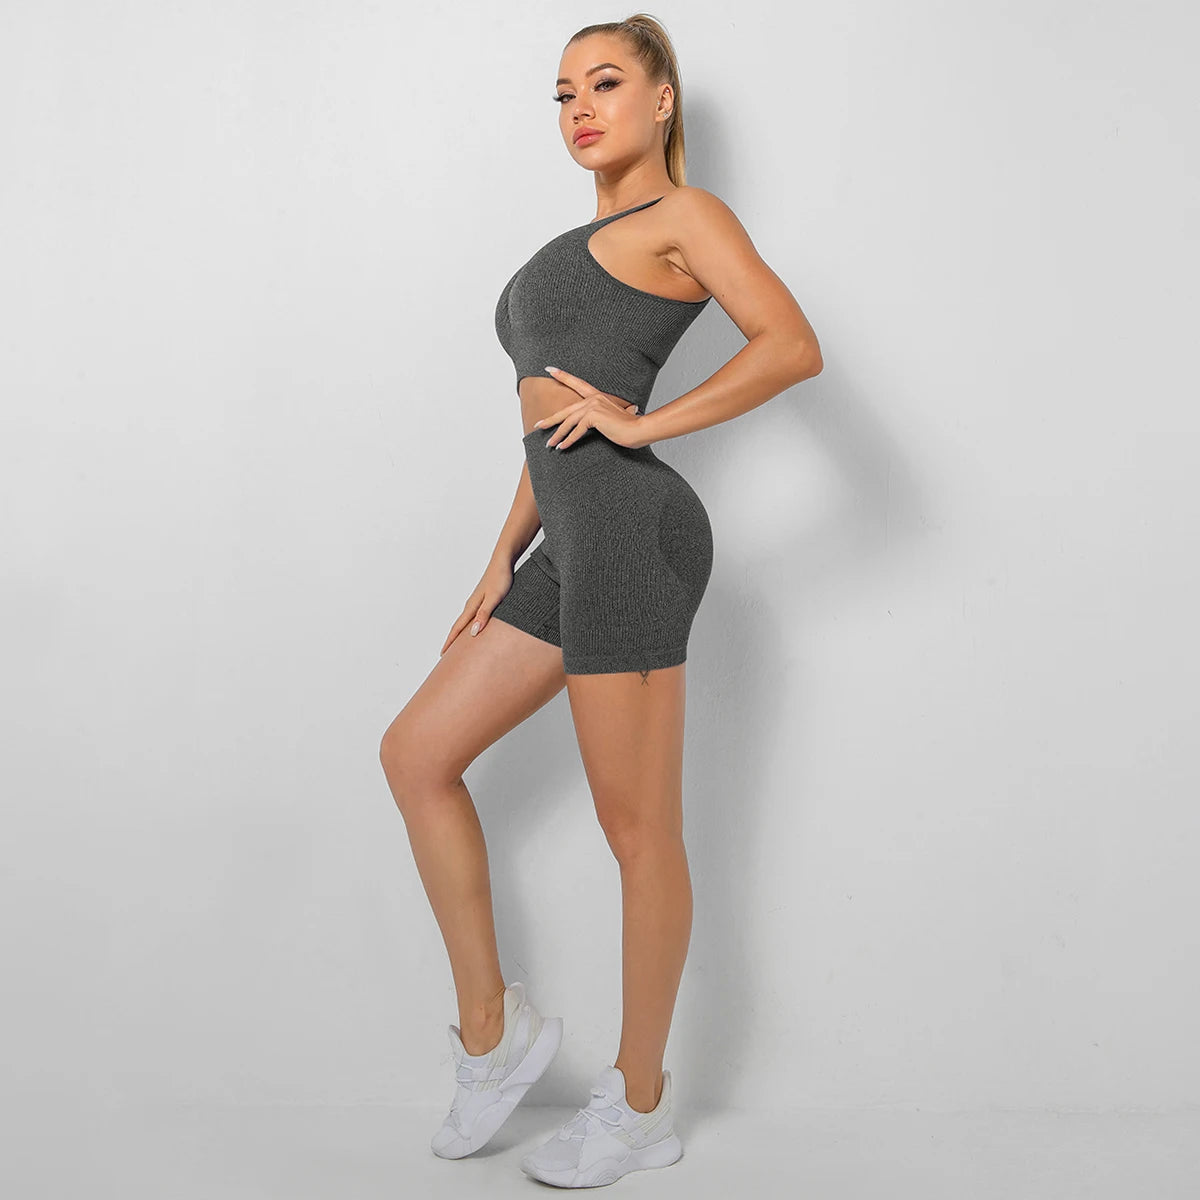 Women Yoga Set Seamless Sport Sportswear High Waist Shorts Leggings Tracksuit Workout Outfits Two Piece Shorts Sets Gym Clothing